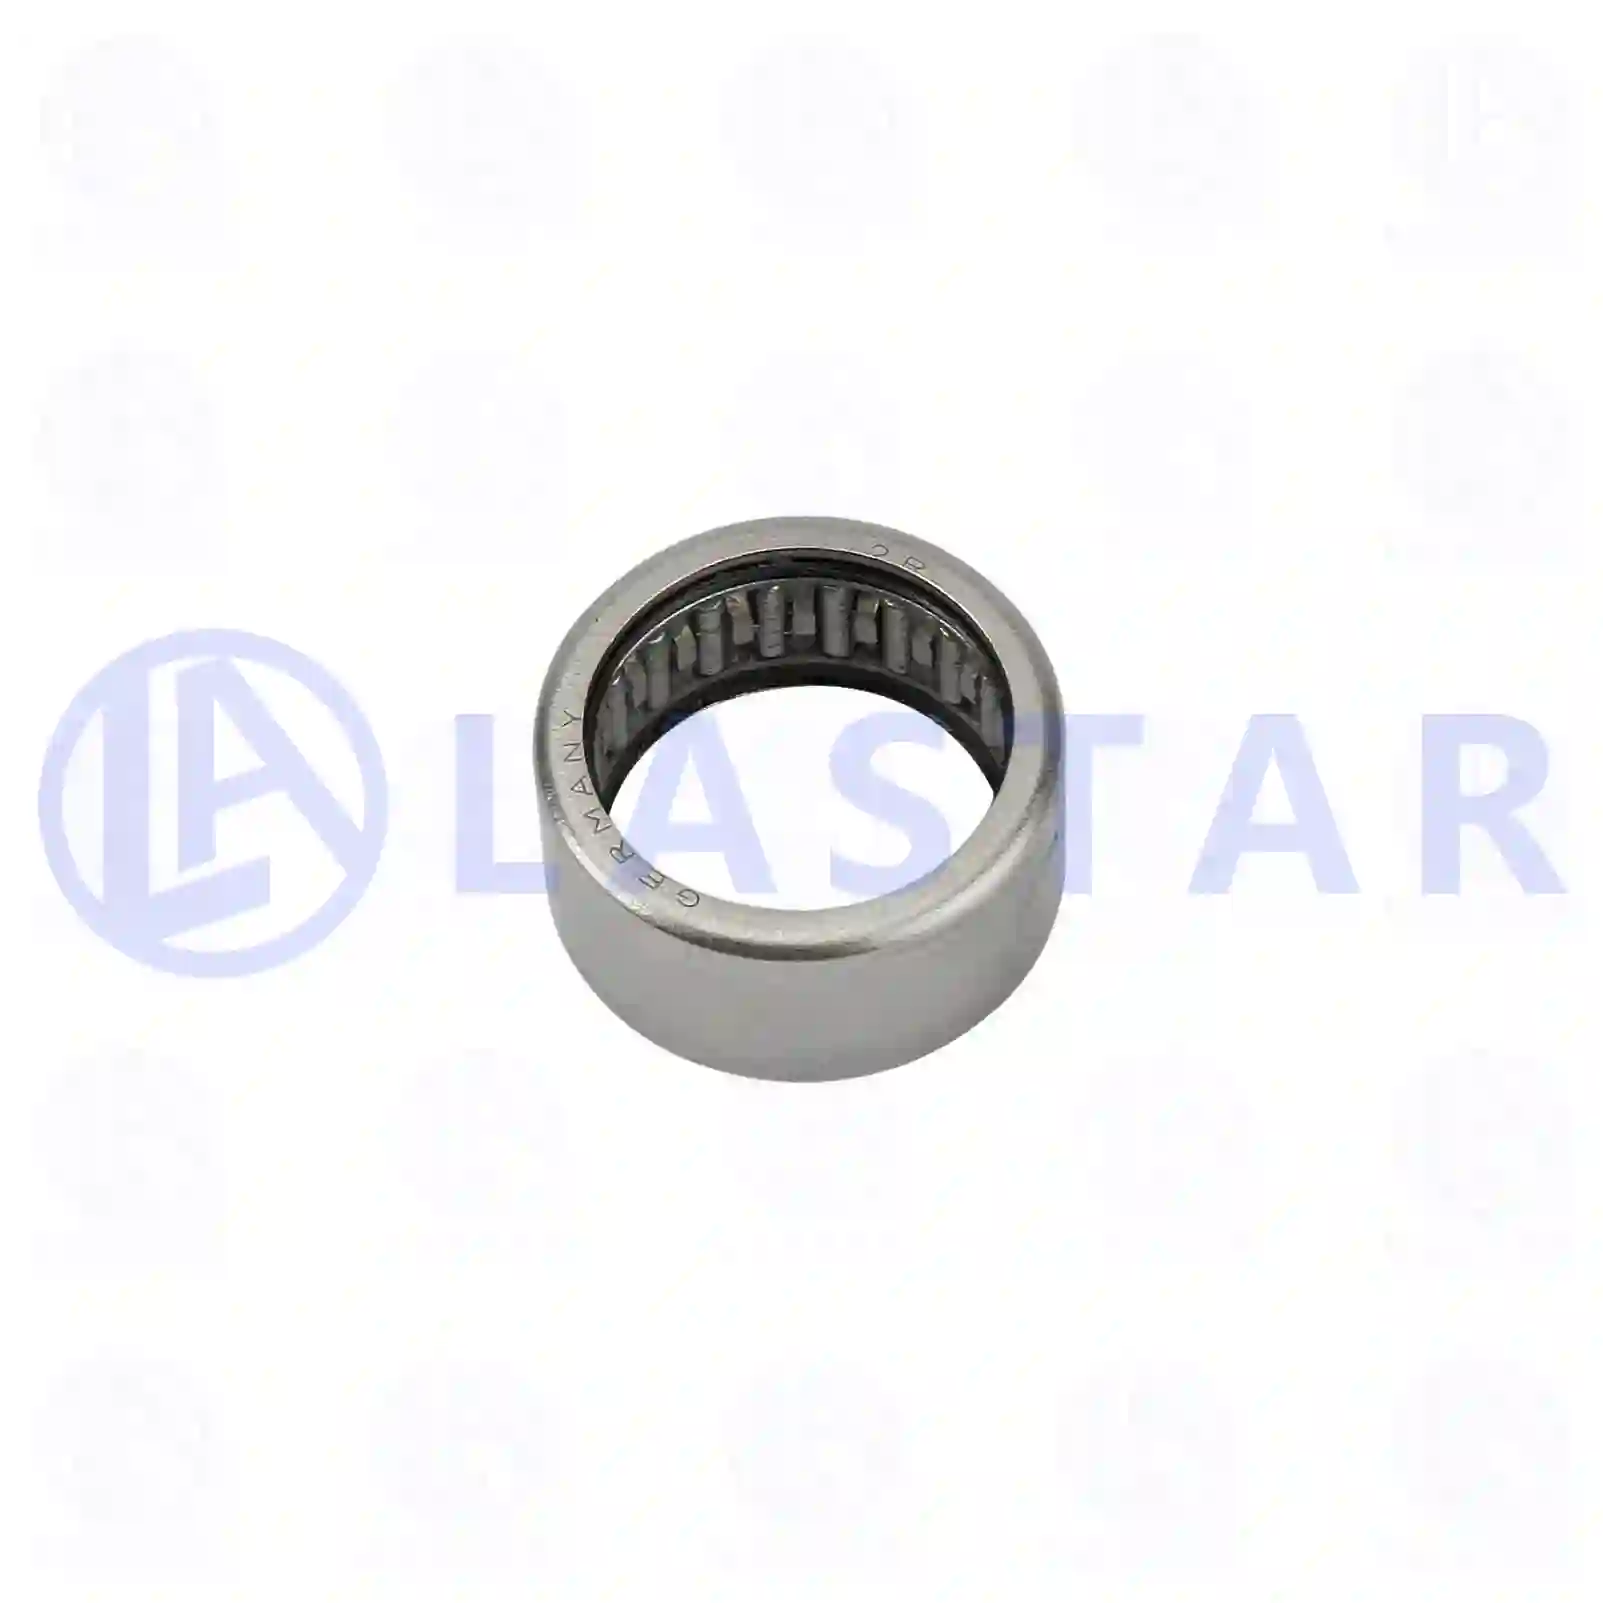  Needle bearing || Lastar Spare Part | Truck Spare Parts, Auotomotive Spare Parts